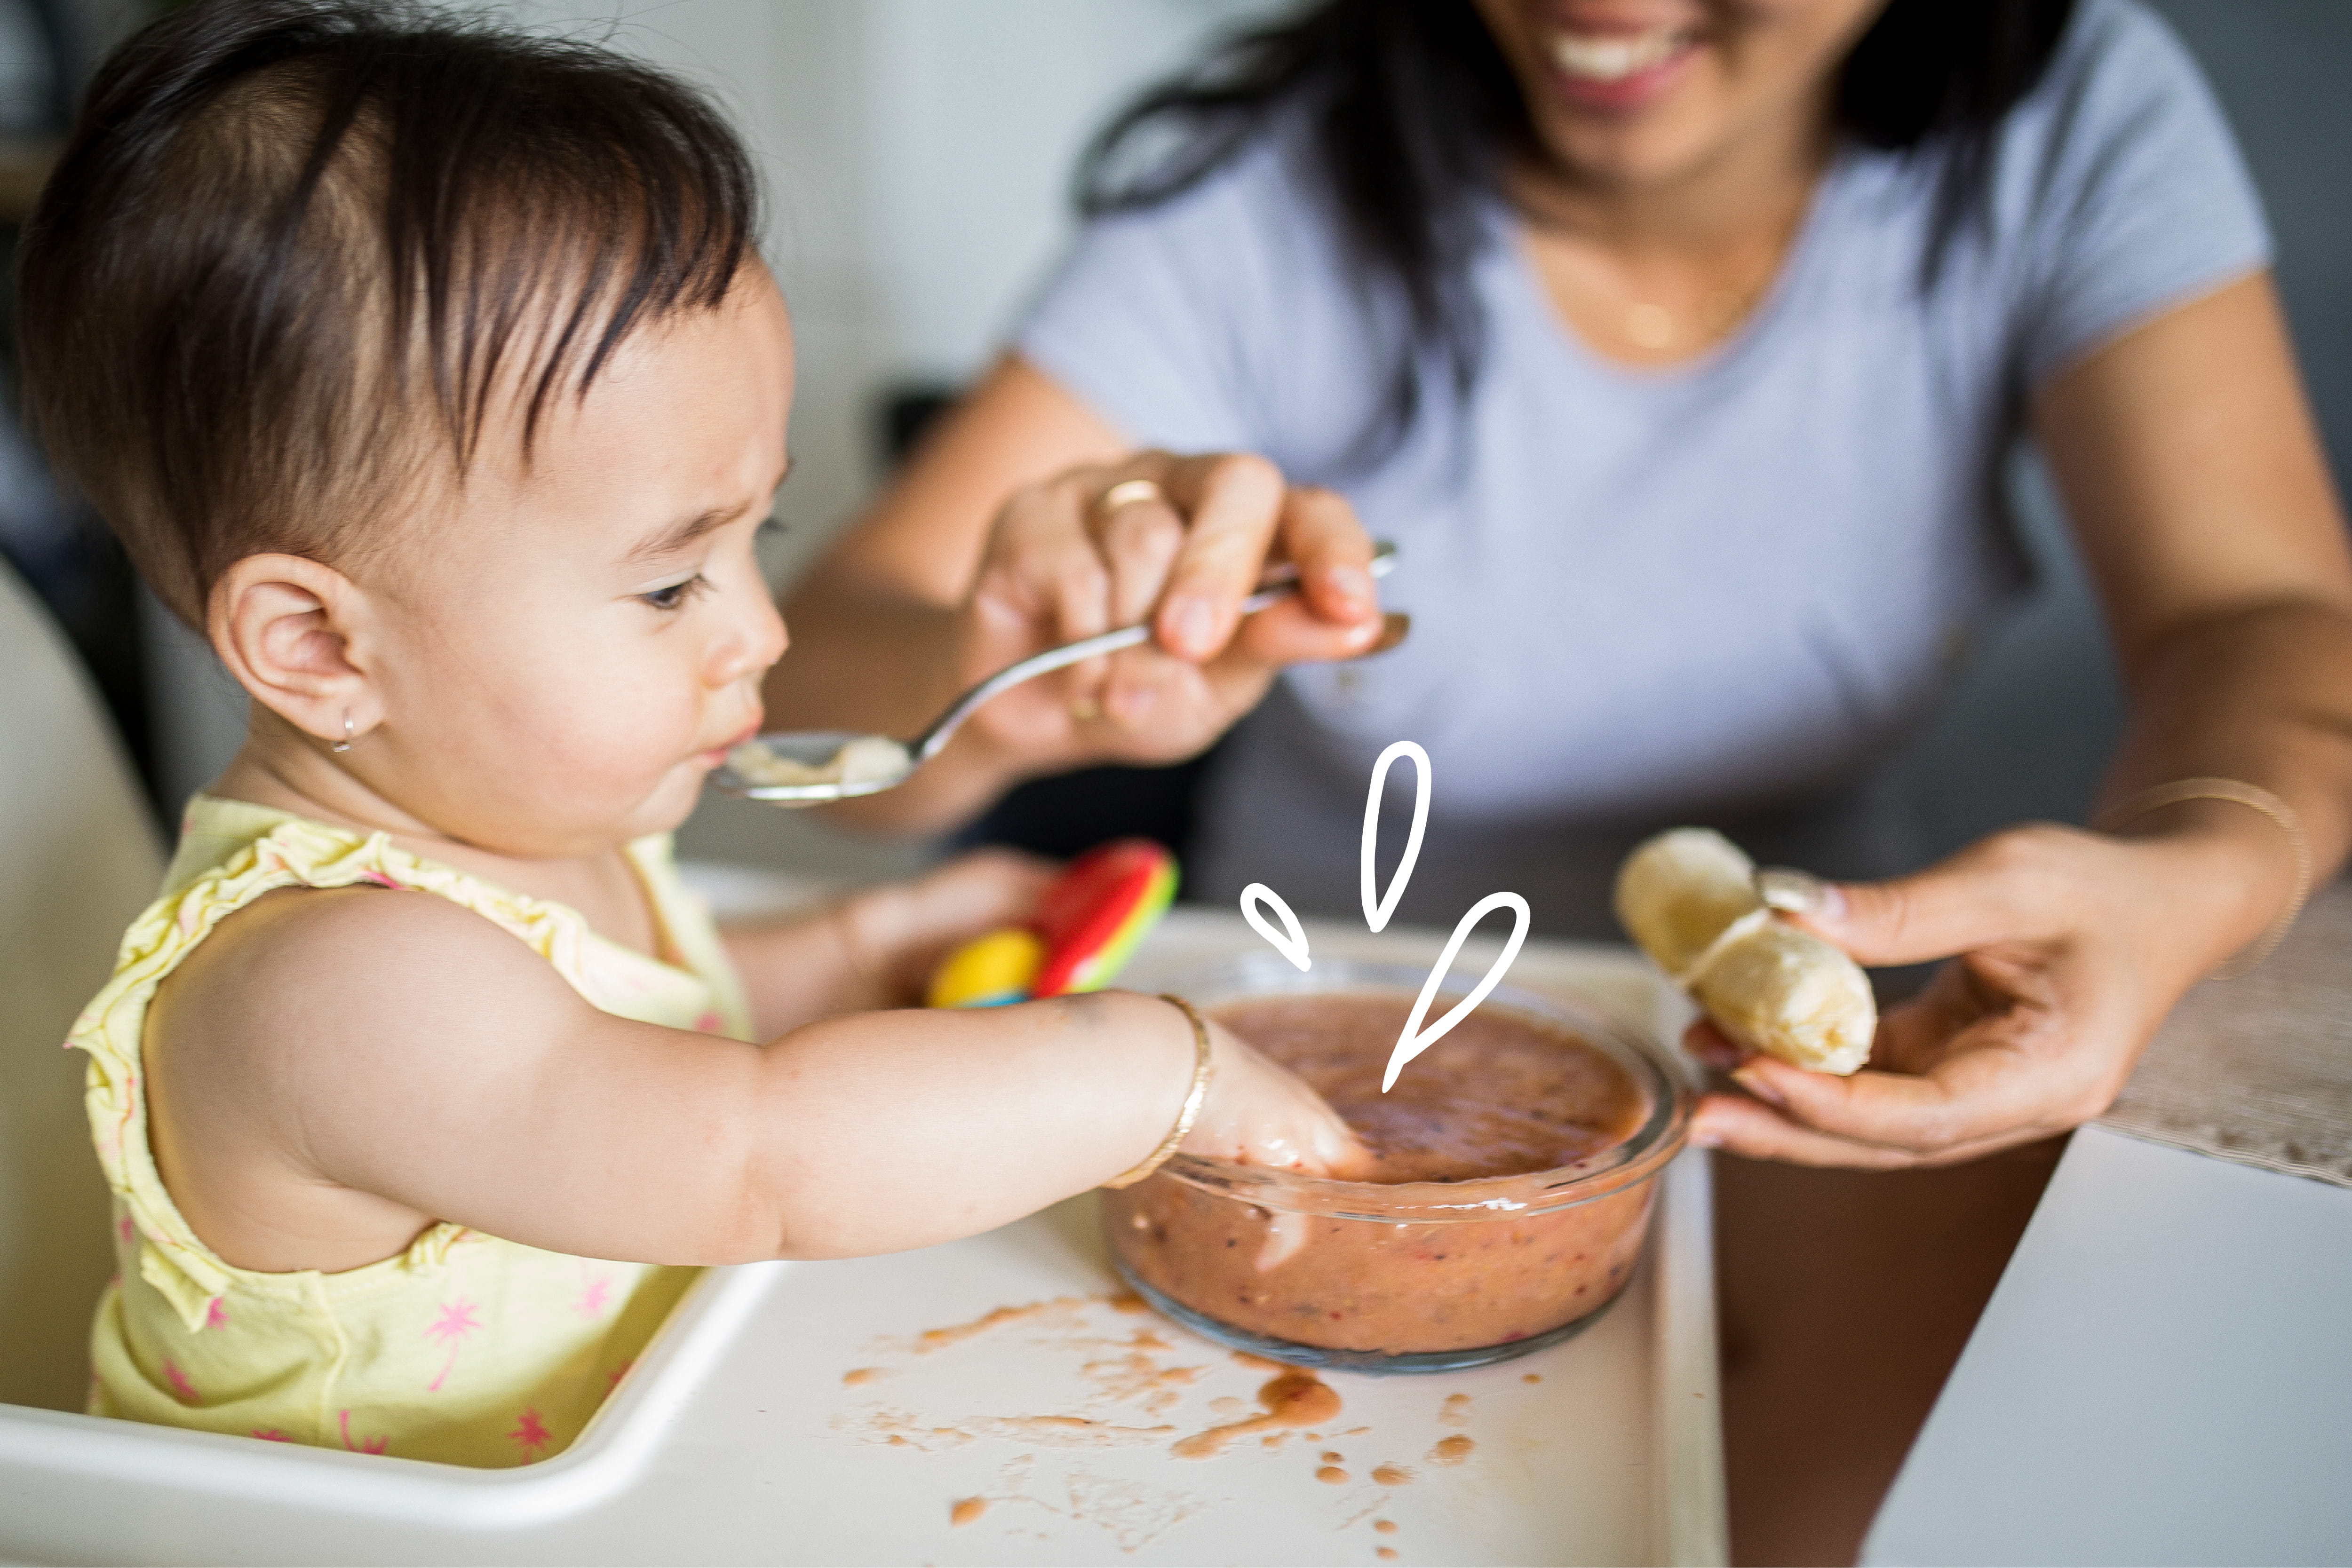 4 Unexpected Foods Your Baby Can Actually Eat